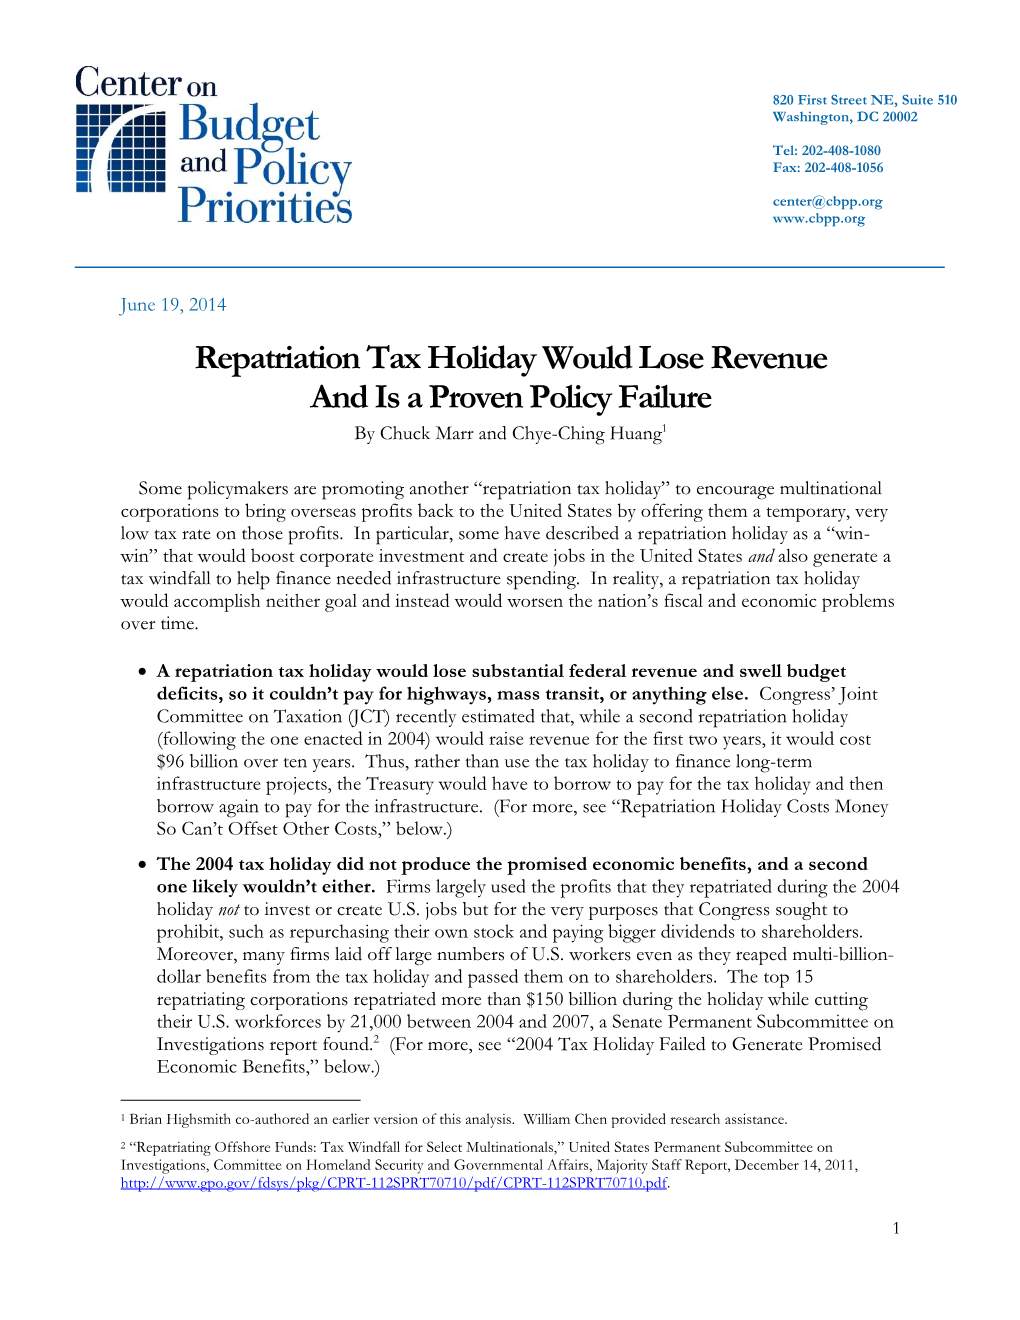 Repatriation Tax Holiday Would Lose Revenue and Is a Proven Policy Failure by Chuck Marr and Chye-Ching Huang1